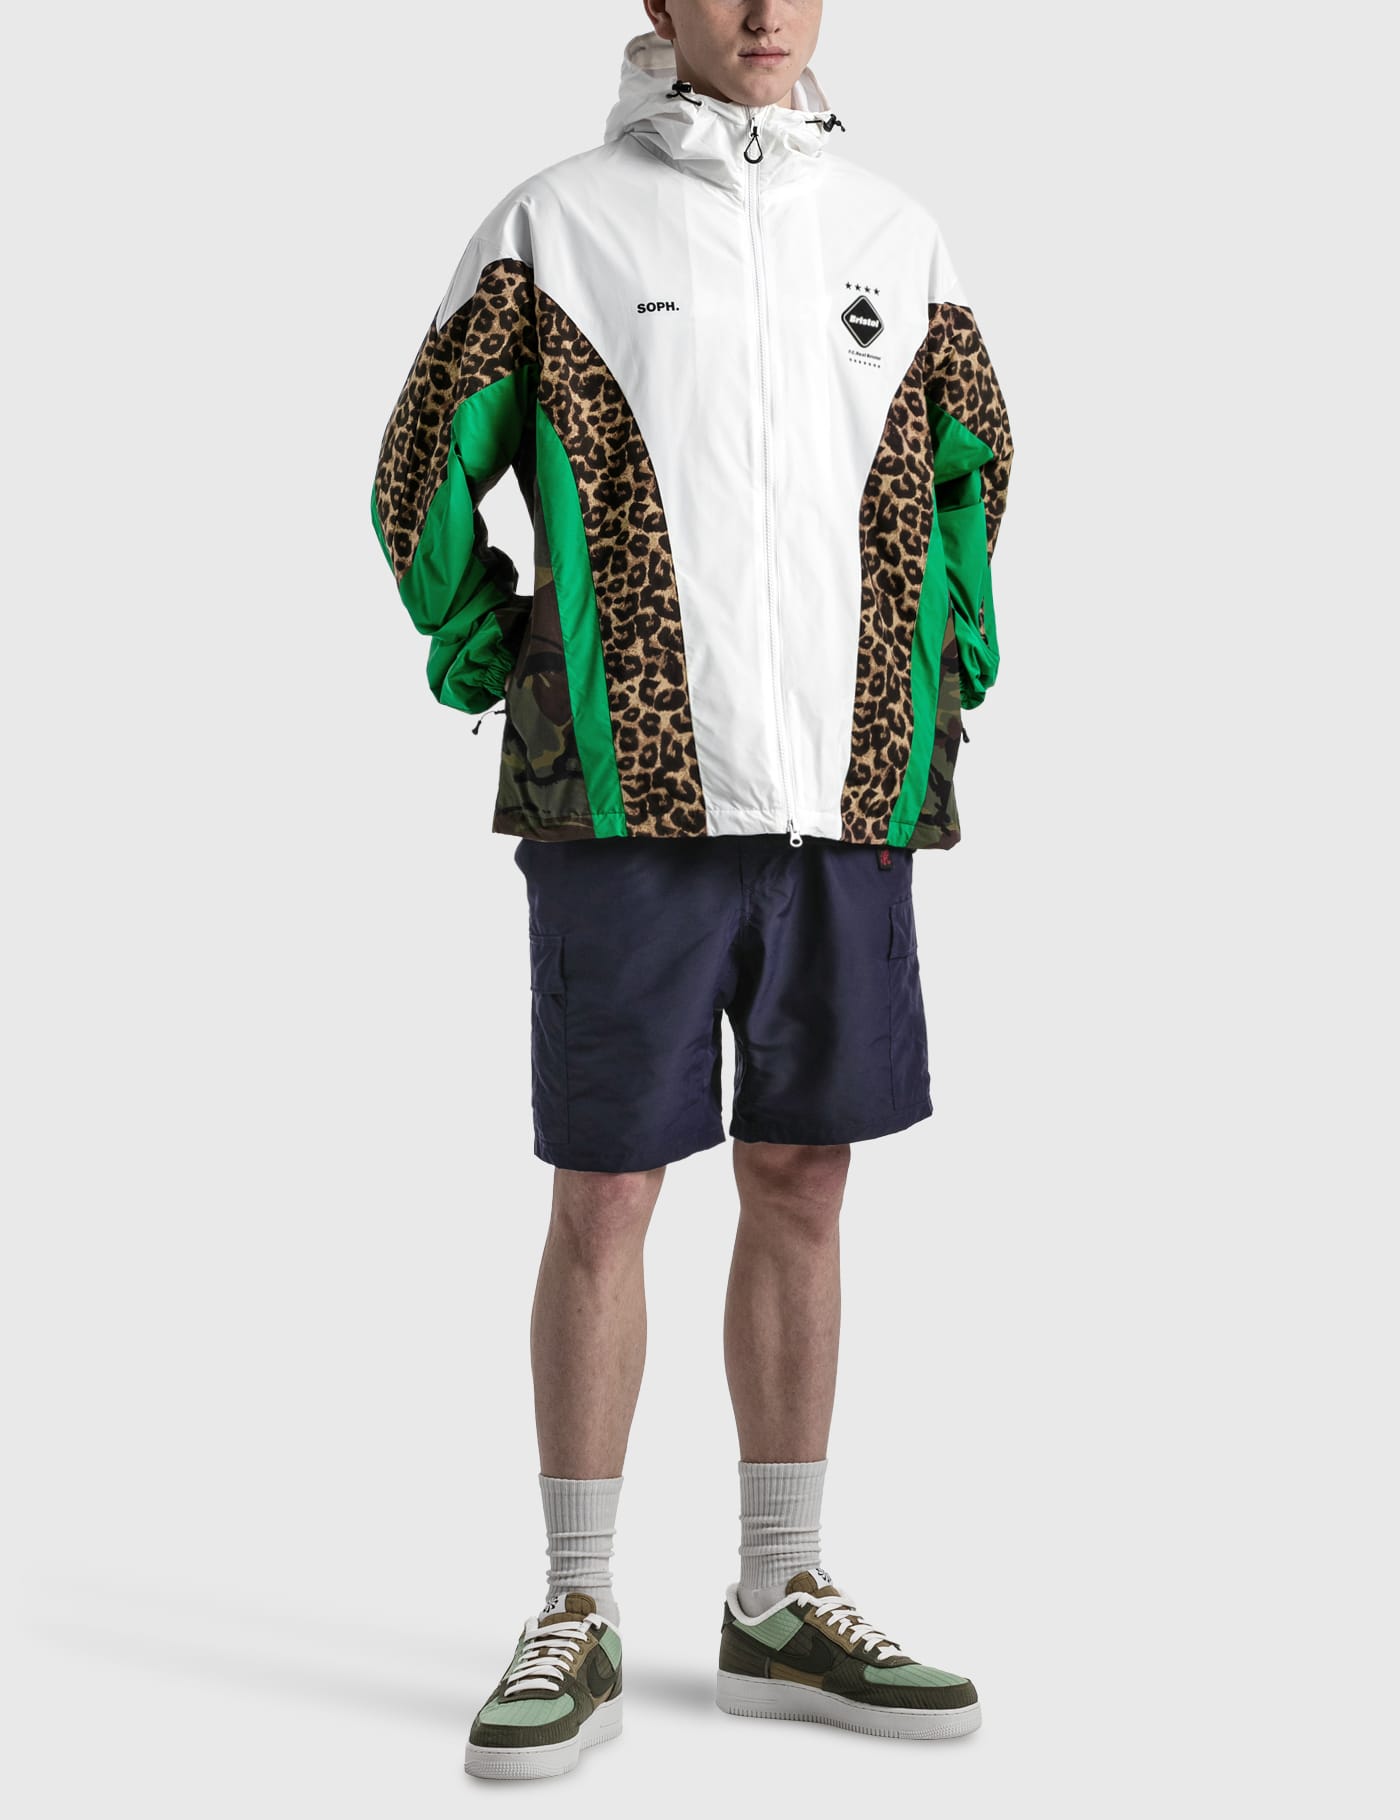 F.C. Real Bristol - Multi Pattern Jacket | HBX - Globally Curated